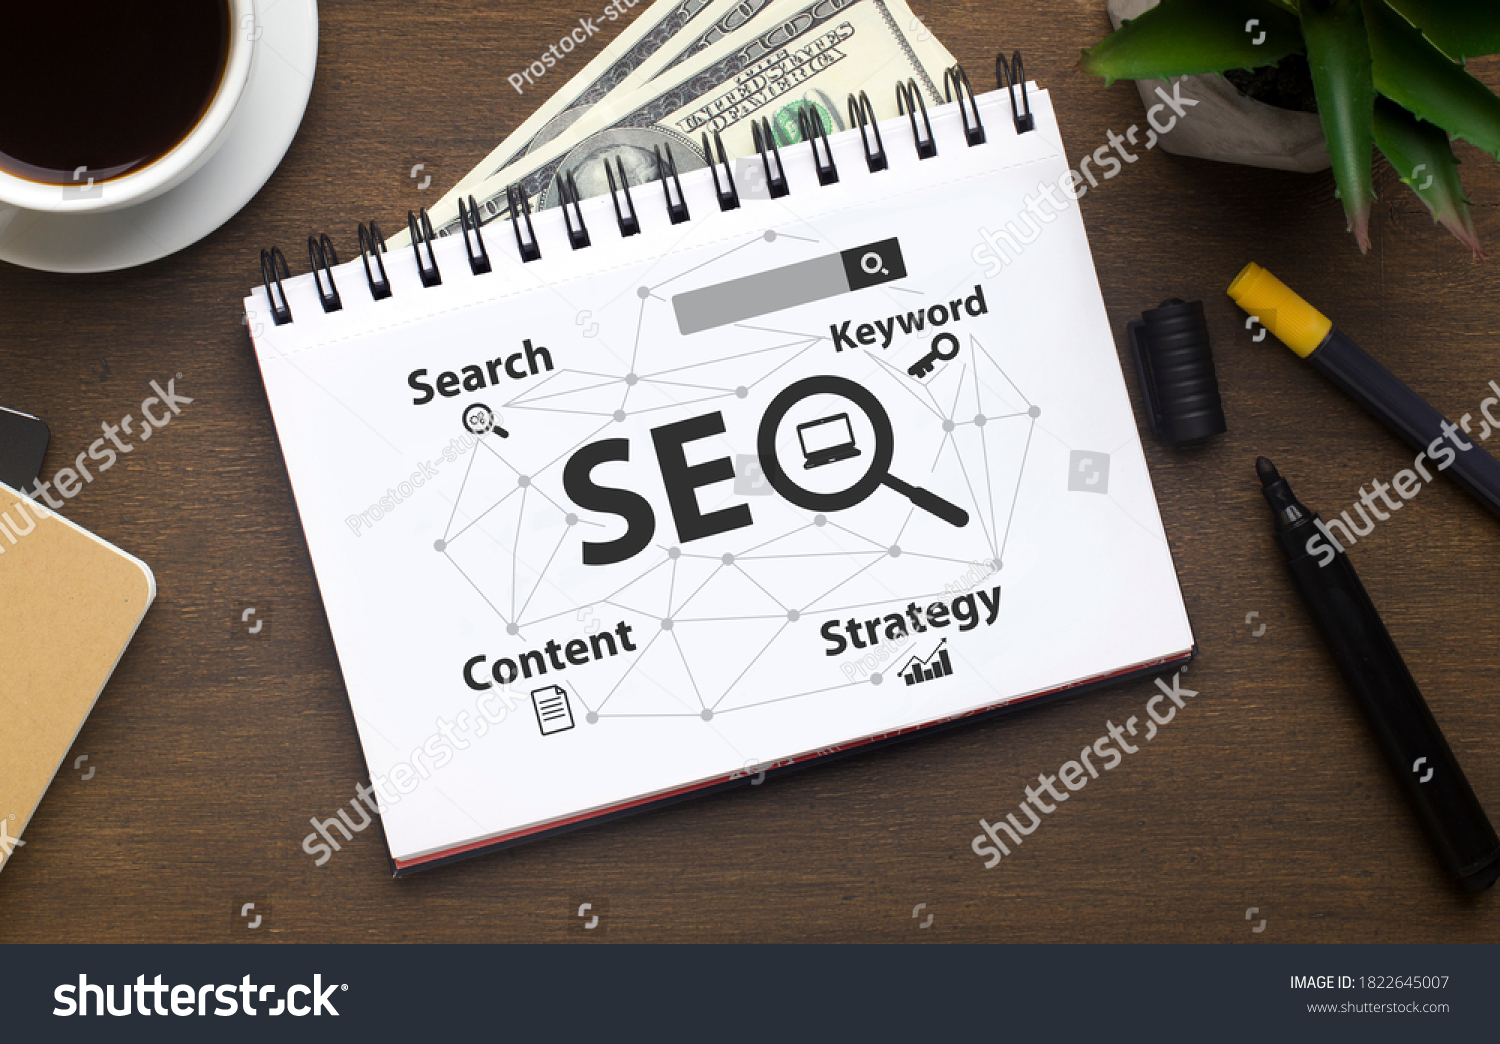 Seo Career. Opened Notebook With Seo-Optimization Scheme Lying Over Brown Office Table Background. Search Engine Optimization For Web Content, Internet Business Development Concept. Collage, Flat Lay #1822645007